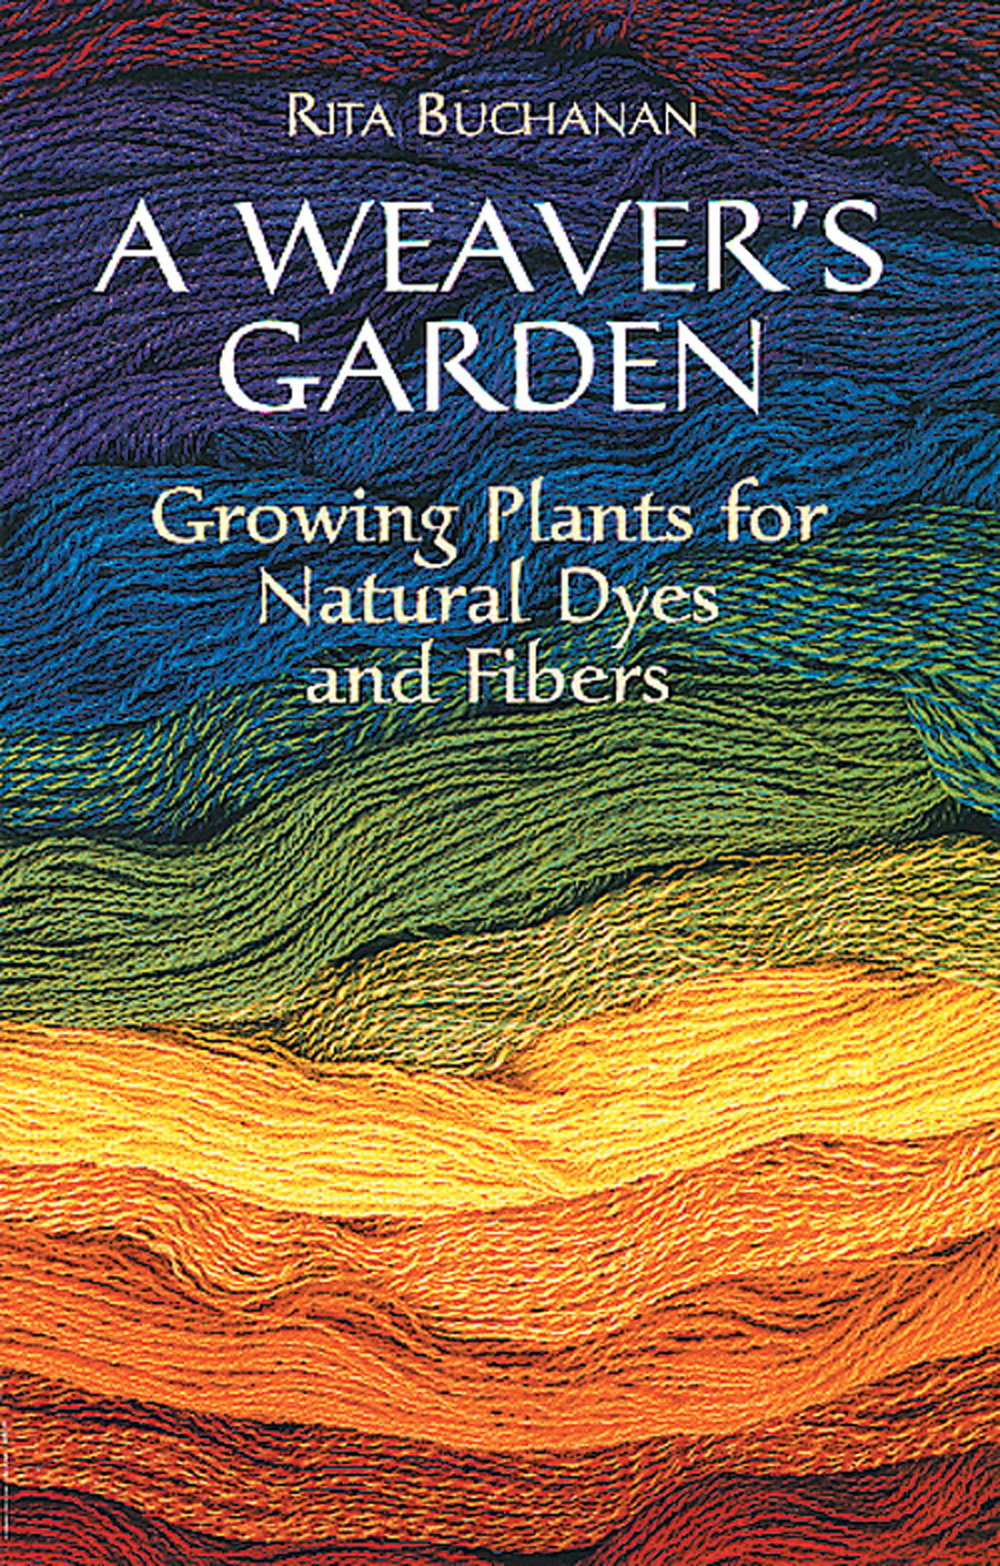 Weaver's Garden (A): Growing Plants for Natural Dyes and Fibers